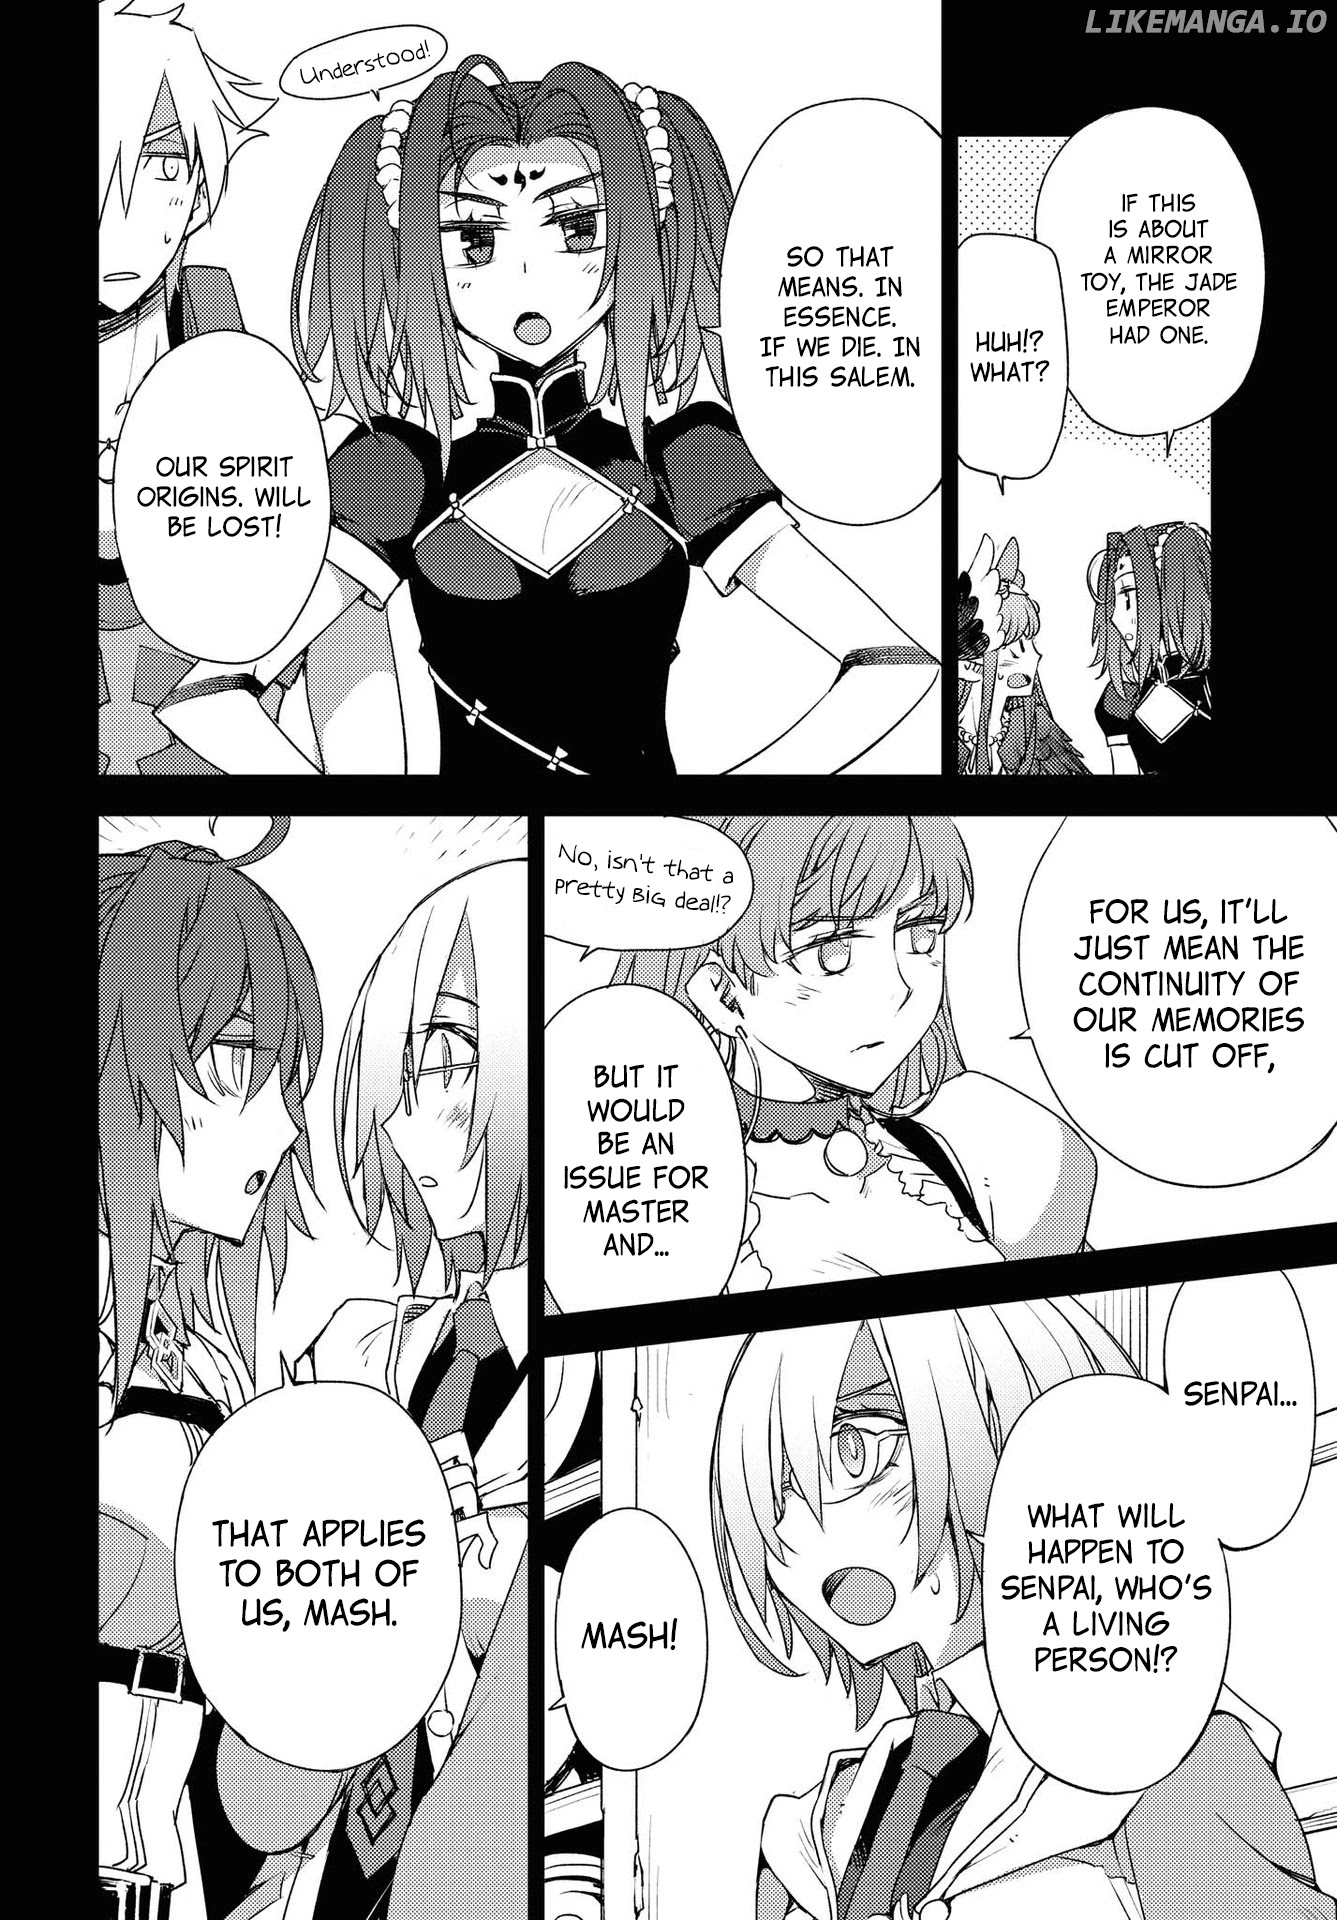 Fate/Grand Order: Epic of Remnant - Subspecies Singularity IV: Taboo Advent Salem: Salem of Heresy chapter 21 - page 22